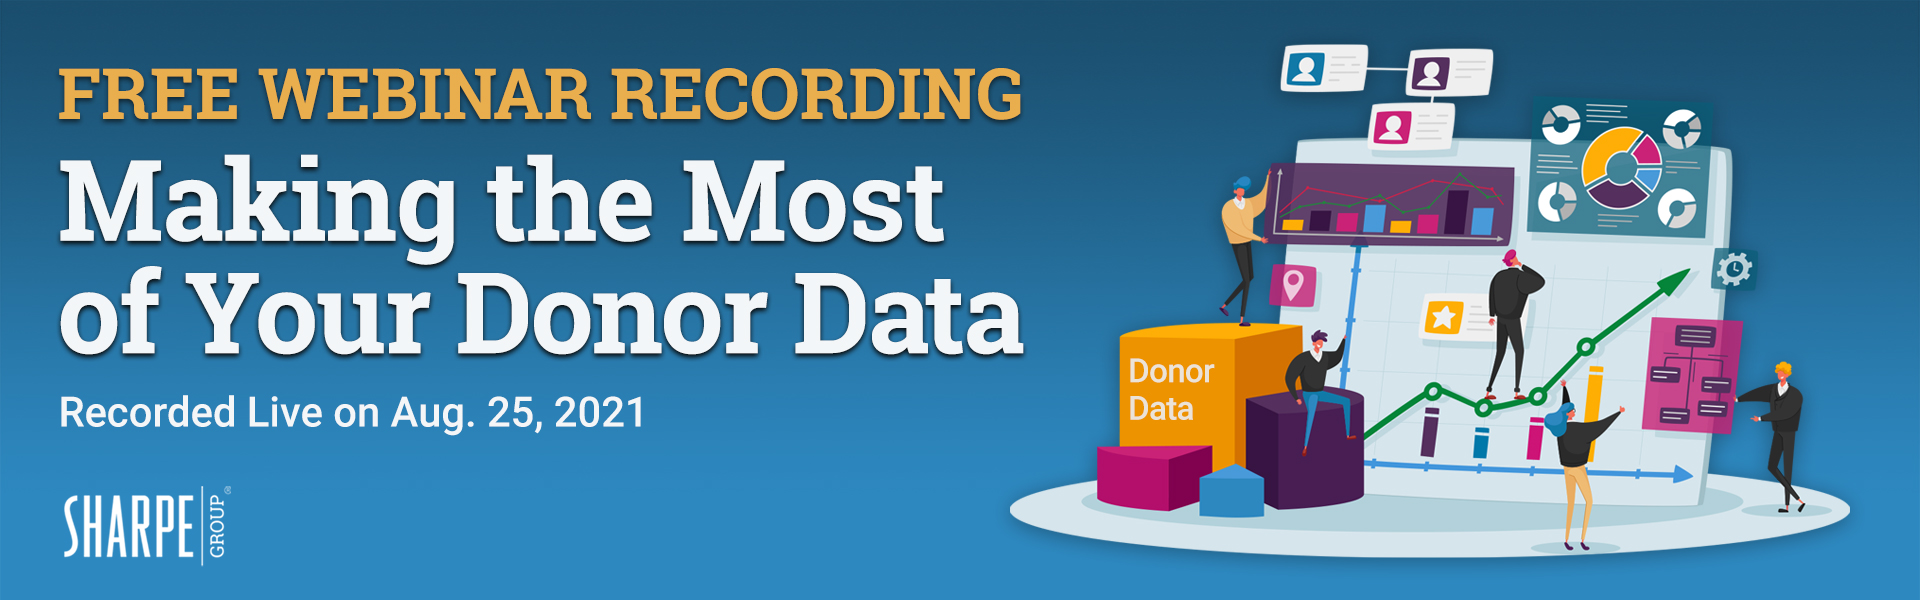 Making the Most of Your Data Webinar Recording